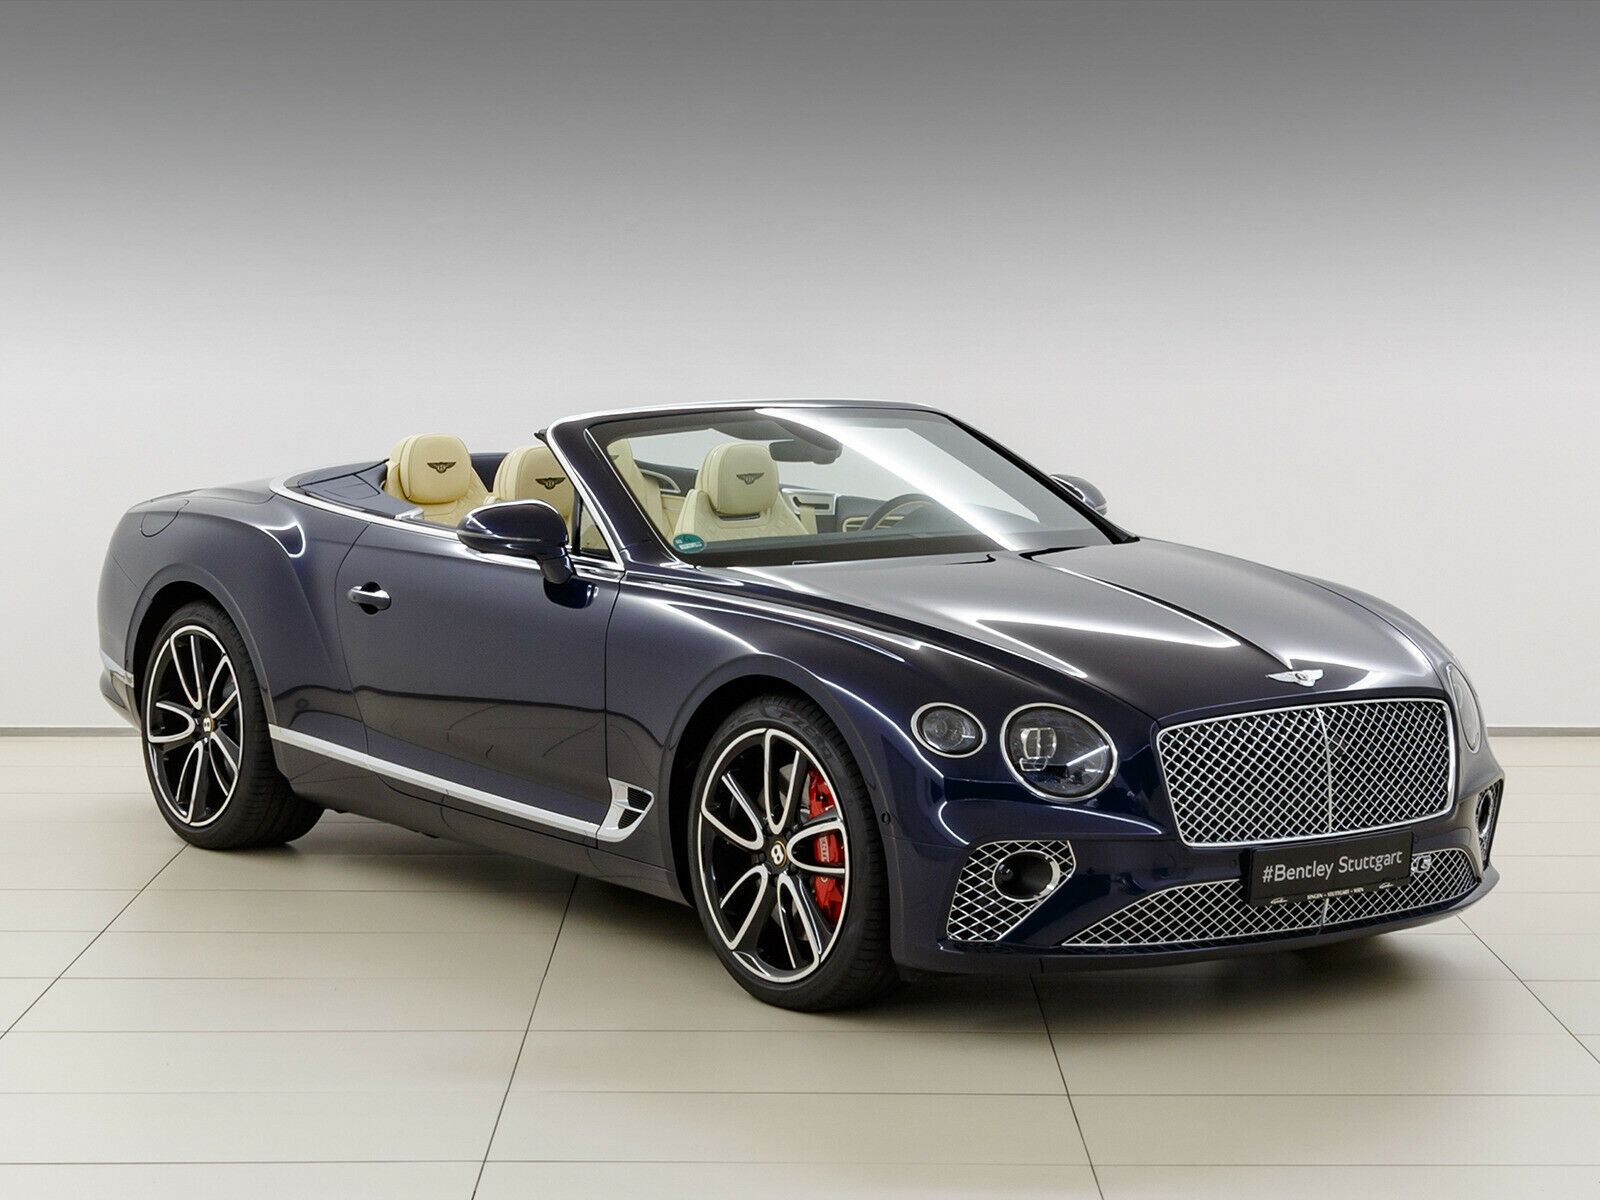 Bentley Continental Gtc Luxury Pulse Cars Germany For Sale On Luxurypulse